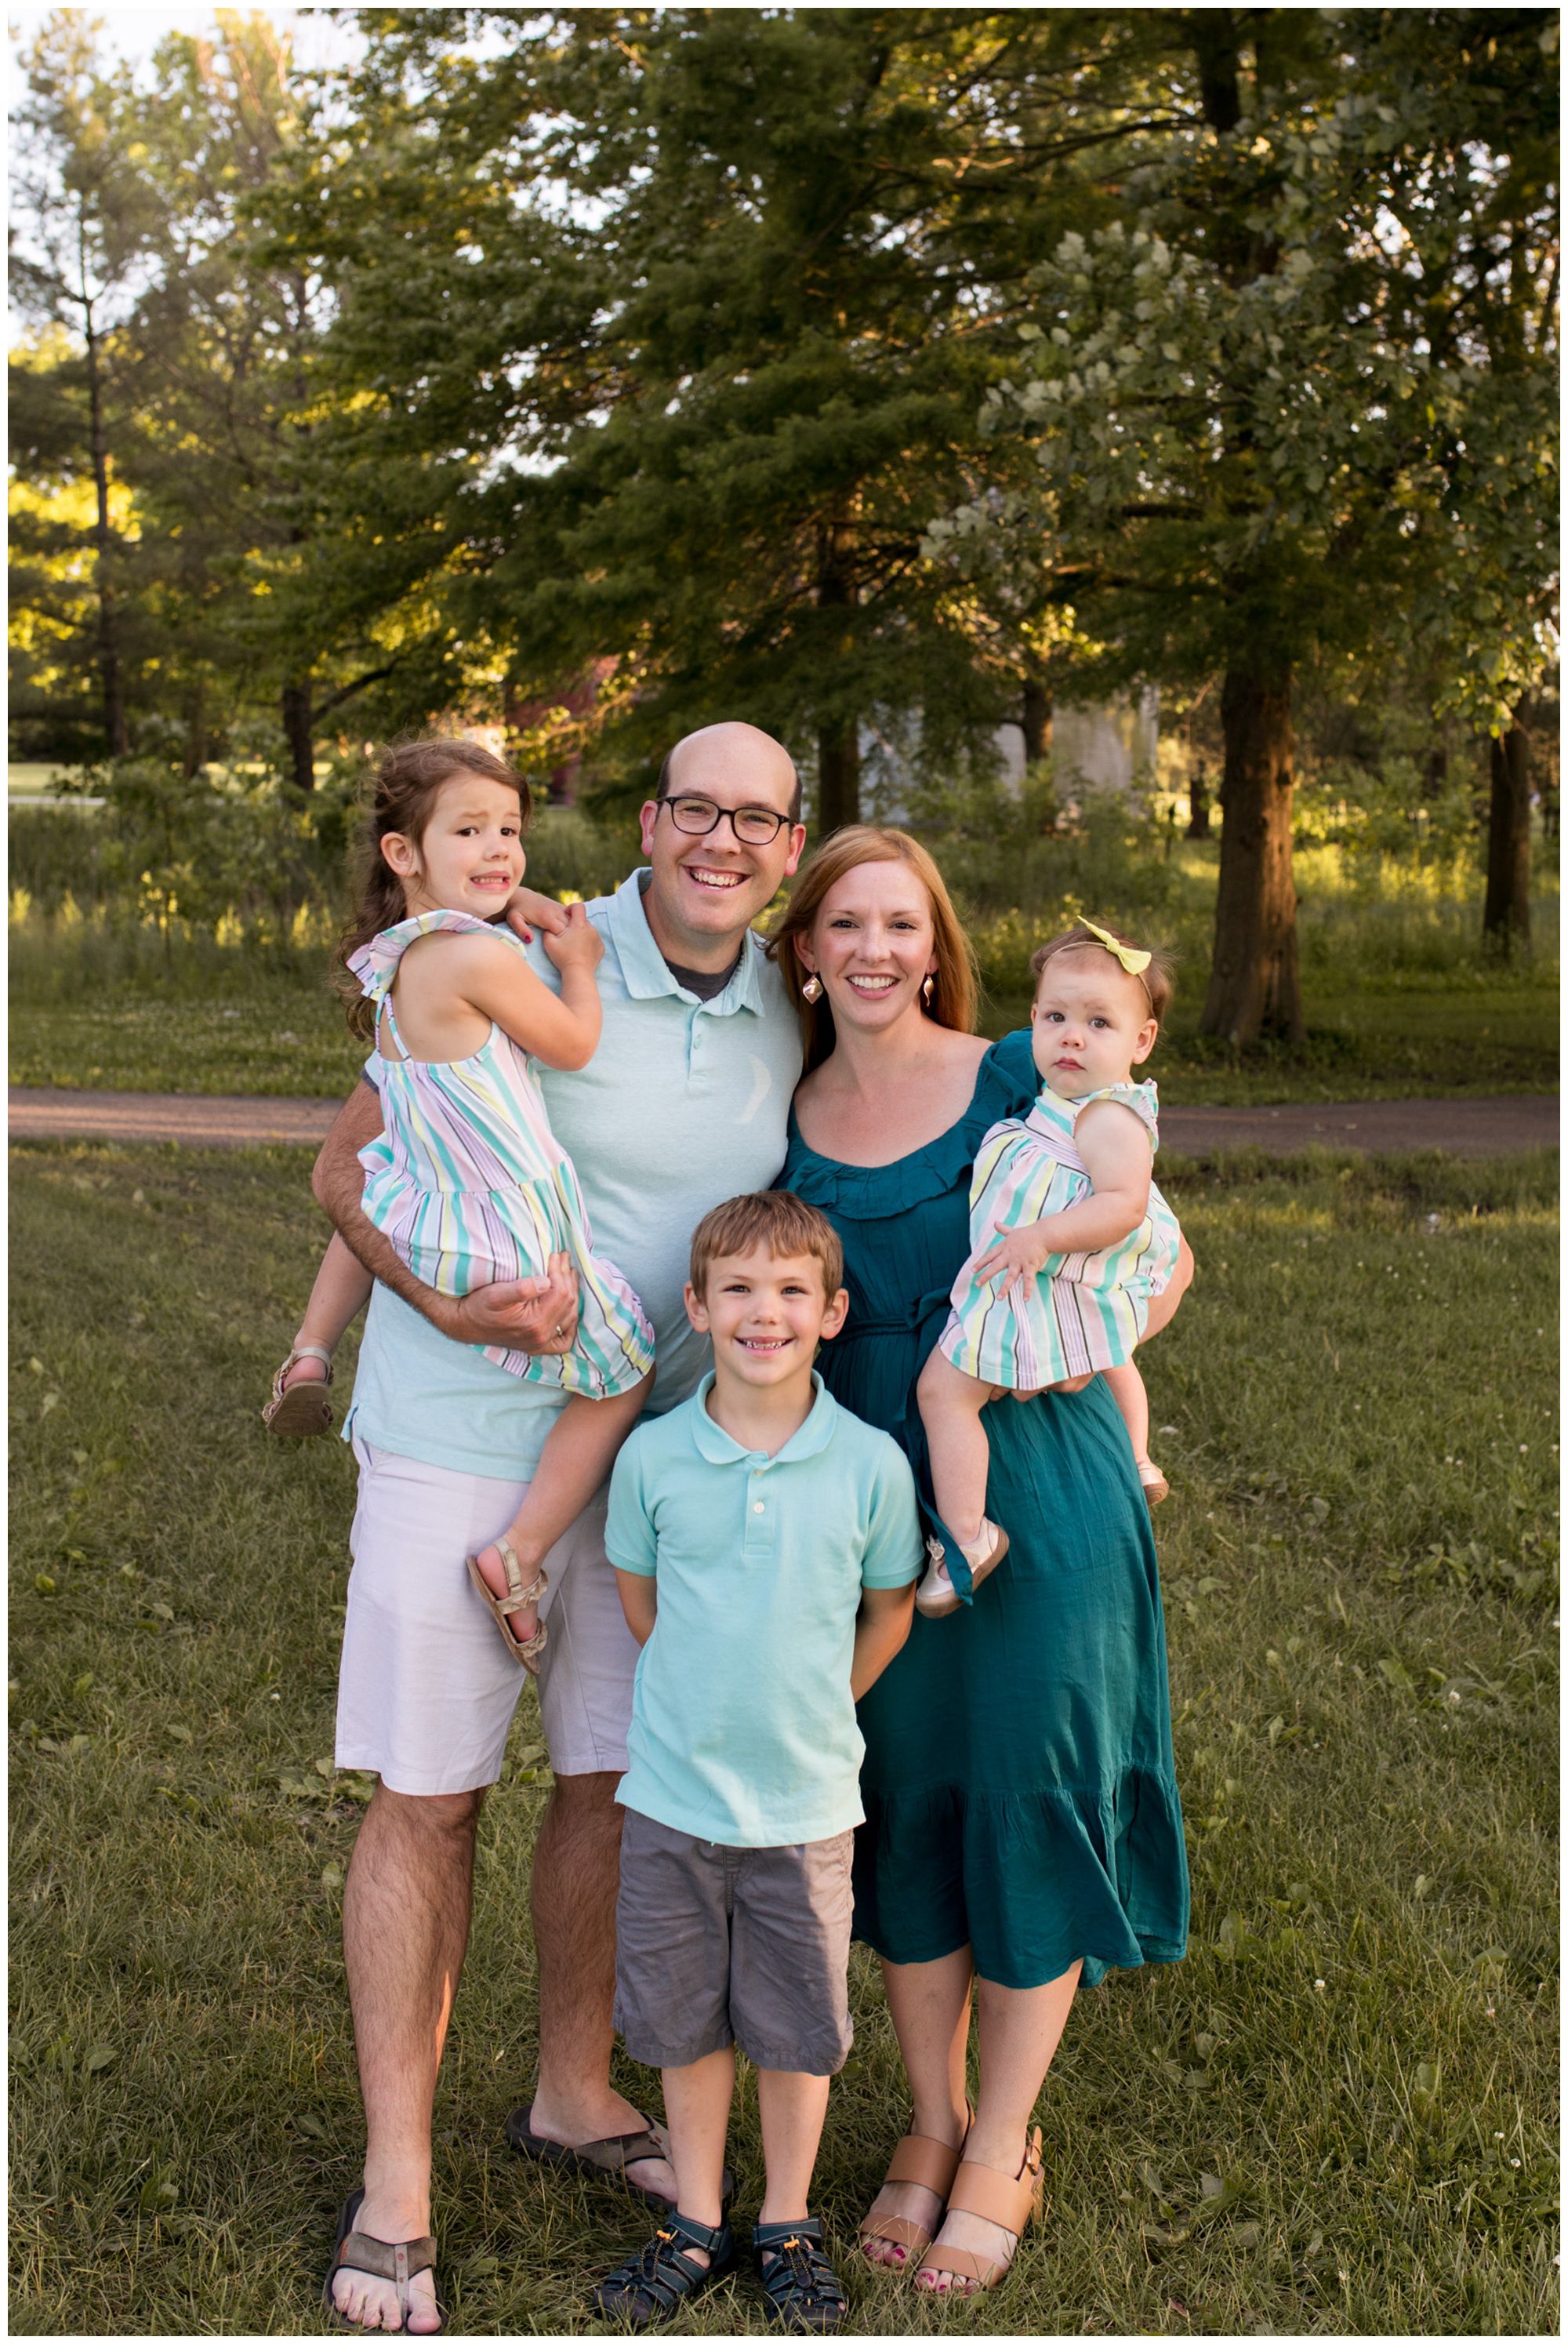 Family session at Coxhall Gardens in Carmel, Indiana